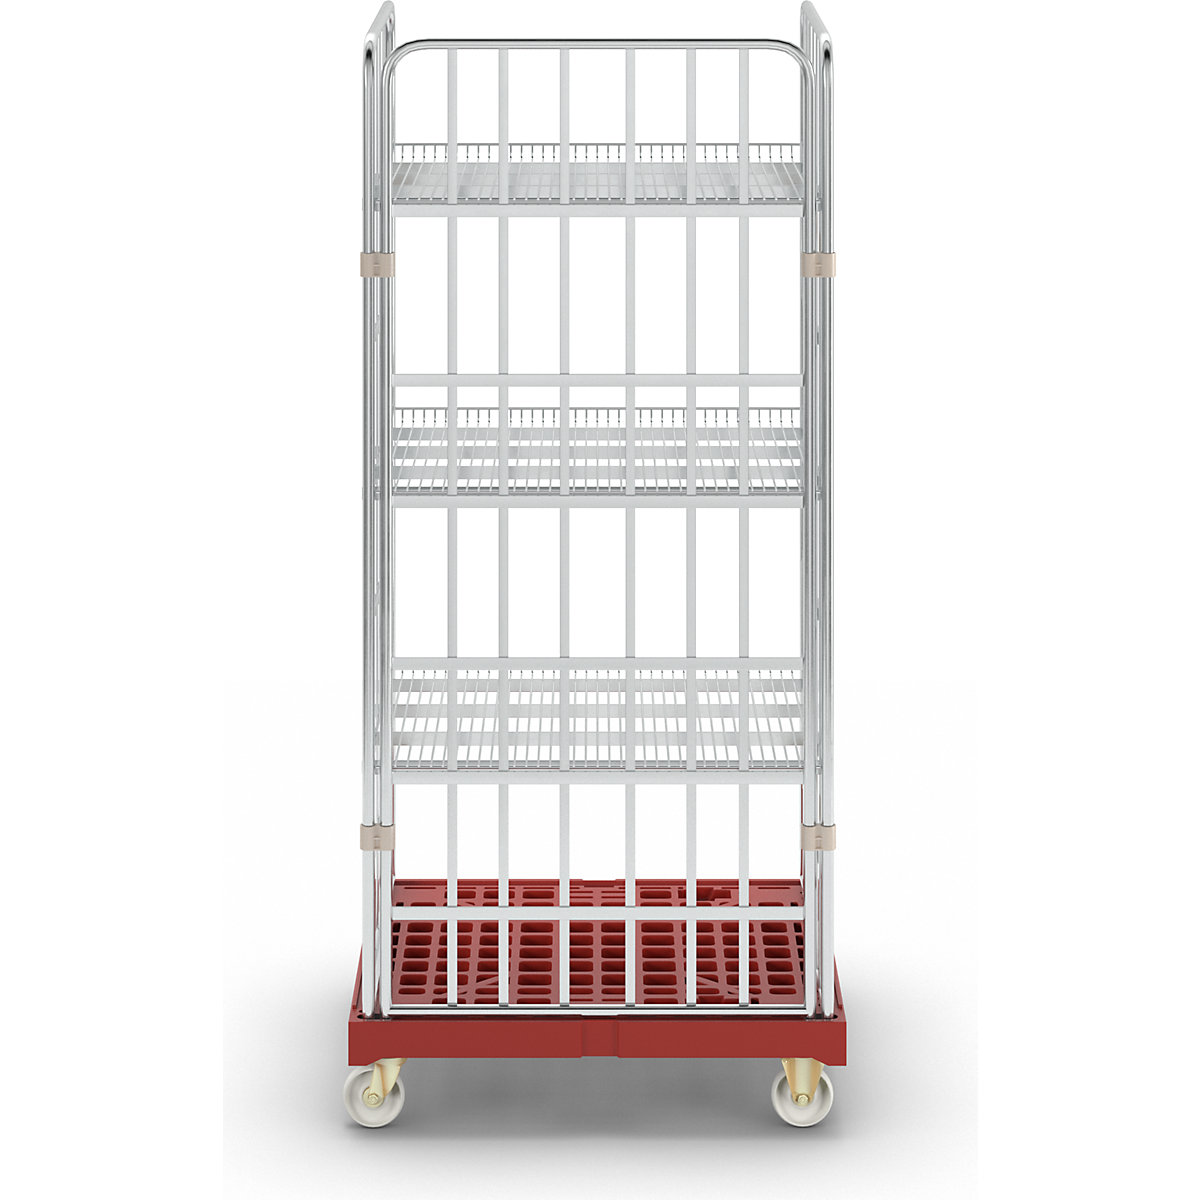 Roll cage incl. shelves (Product illustration 8)-7